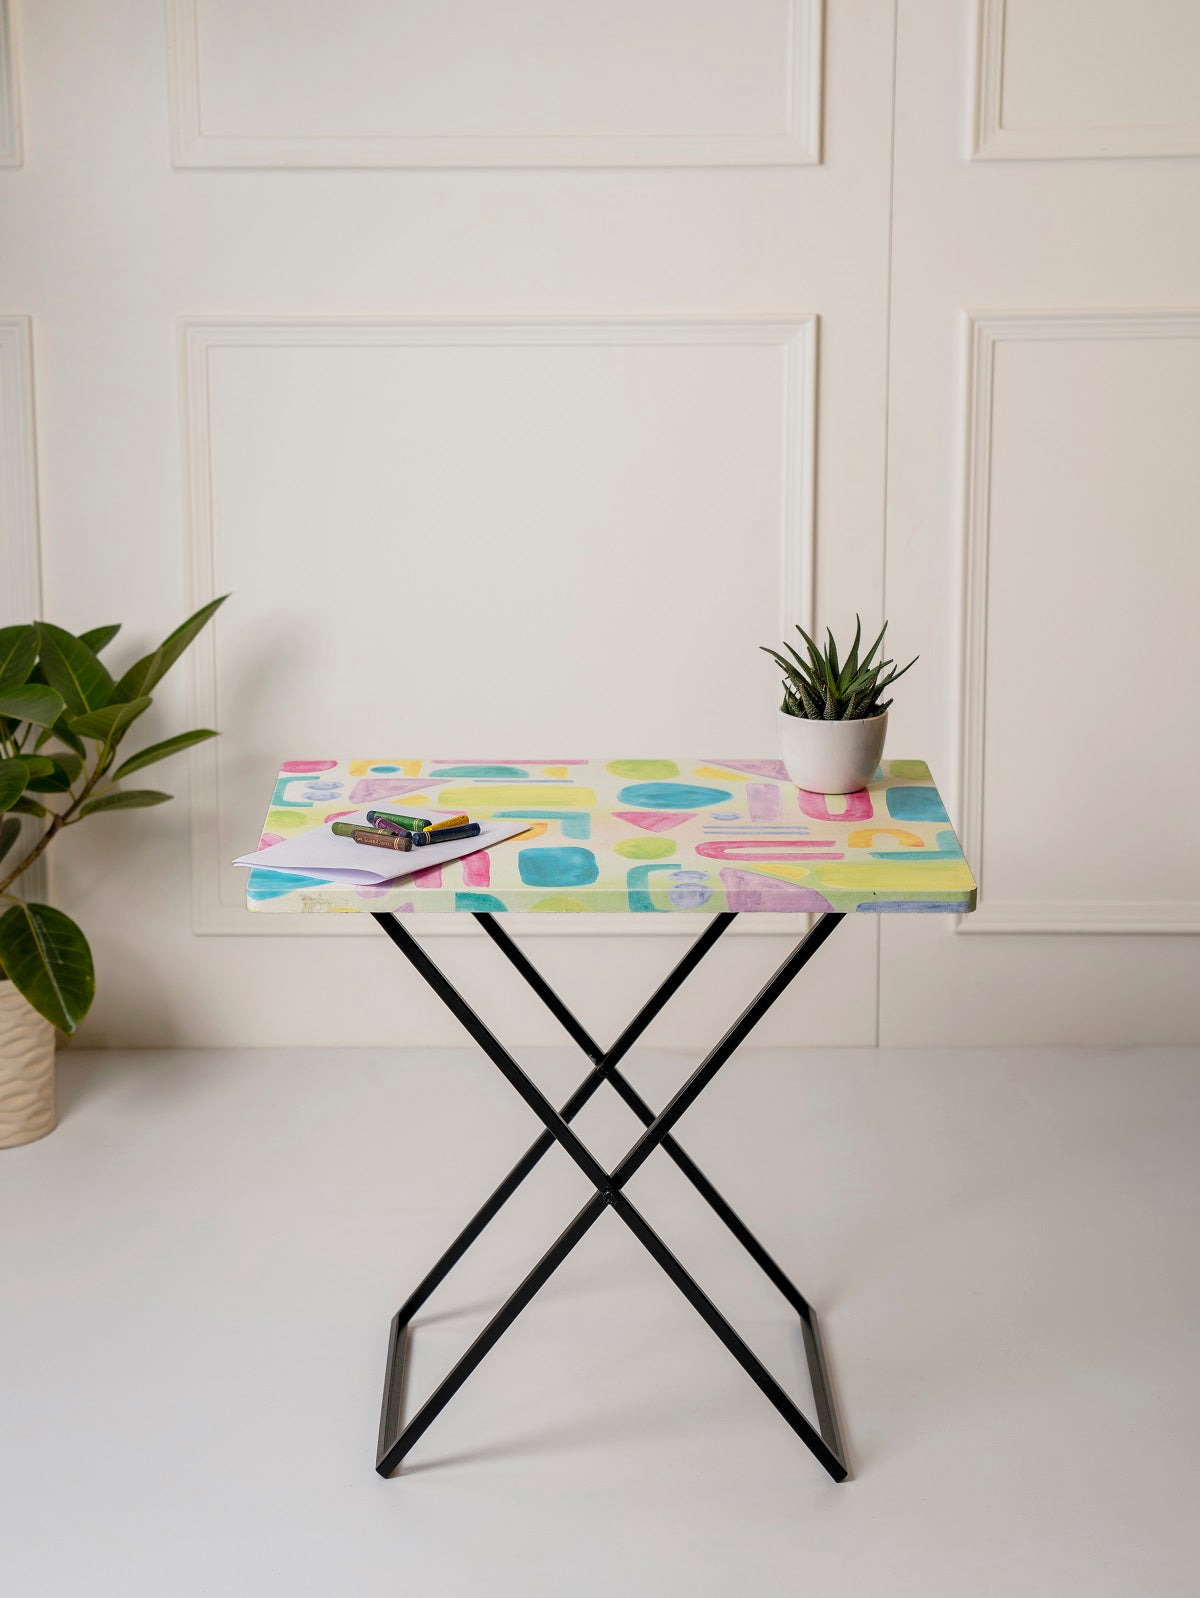 Tiny Doodles Criss Cross Side Tables, Writing Tables, Wooden Tables, Kids Tables, End Tables Living Room Decor by A Tiny Mistake